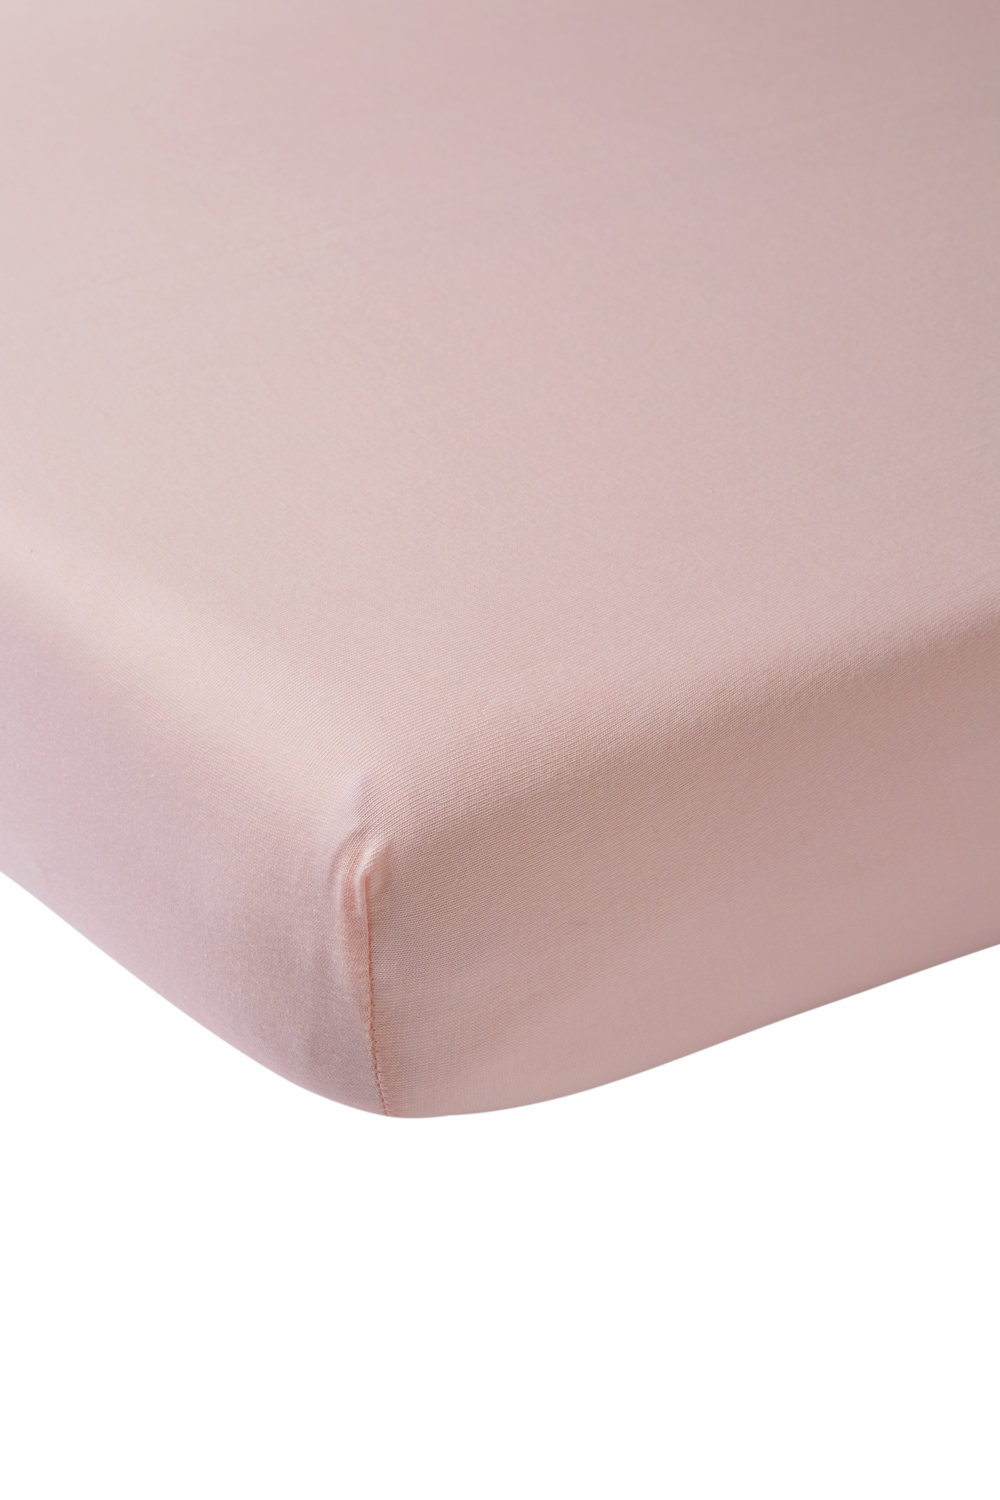 Jersey Fitted Sheet - Old Pink - 70X140/150cm